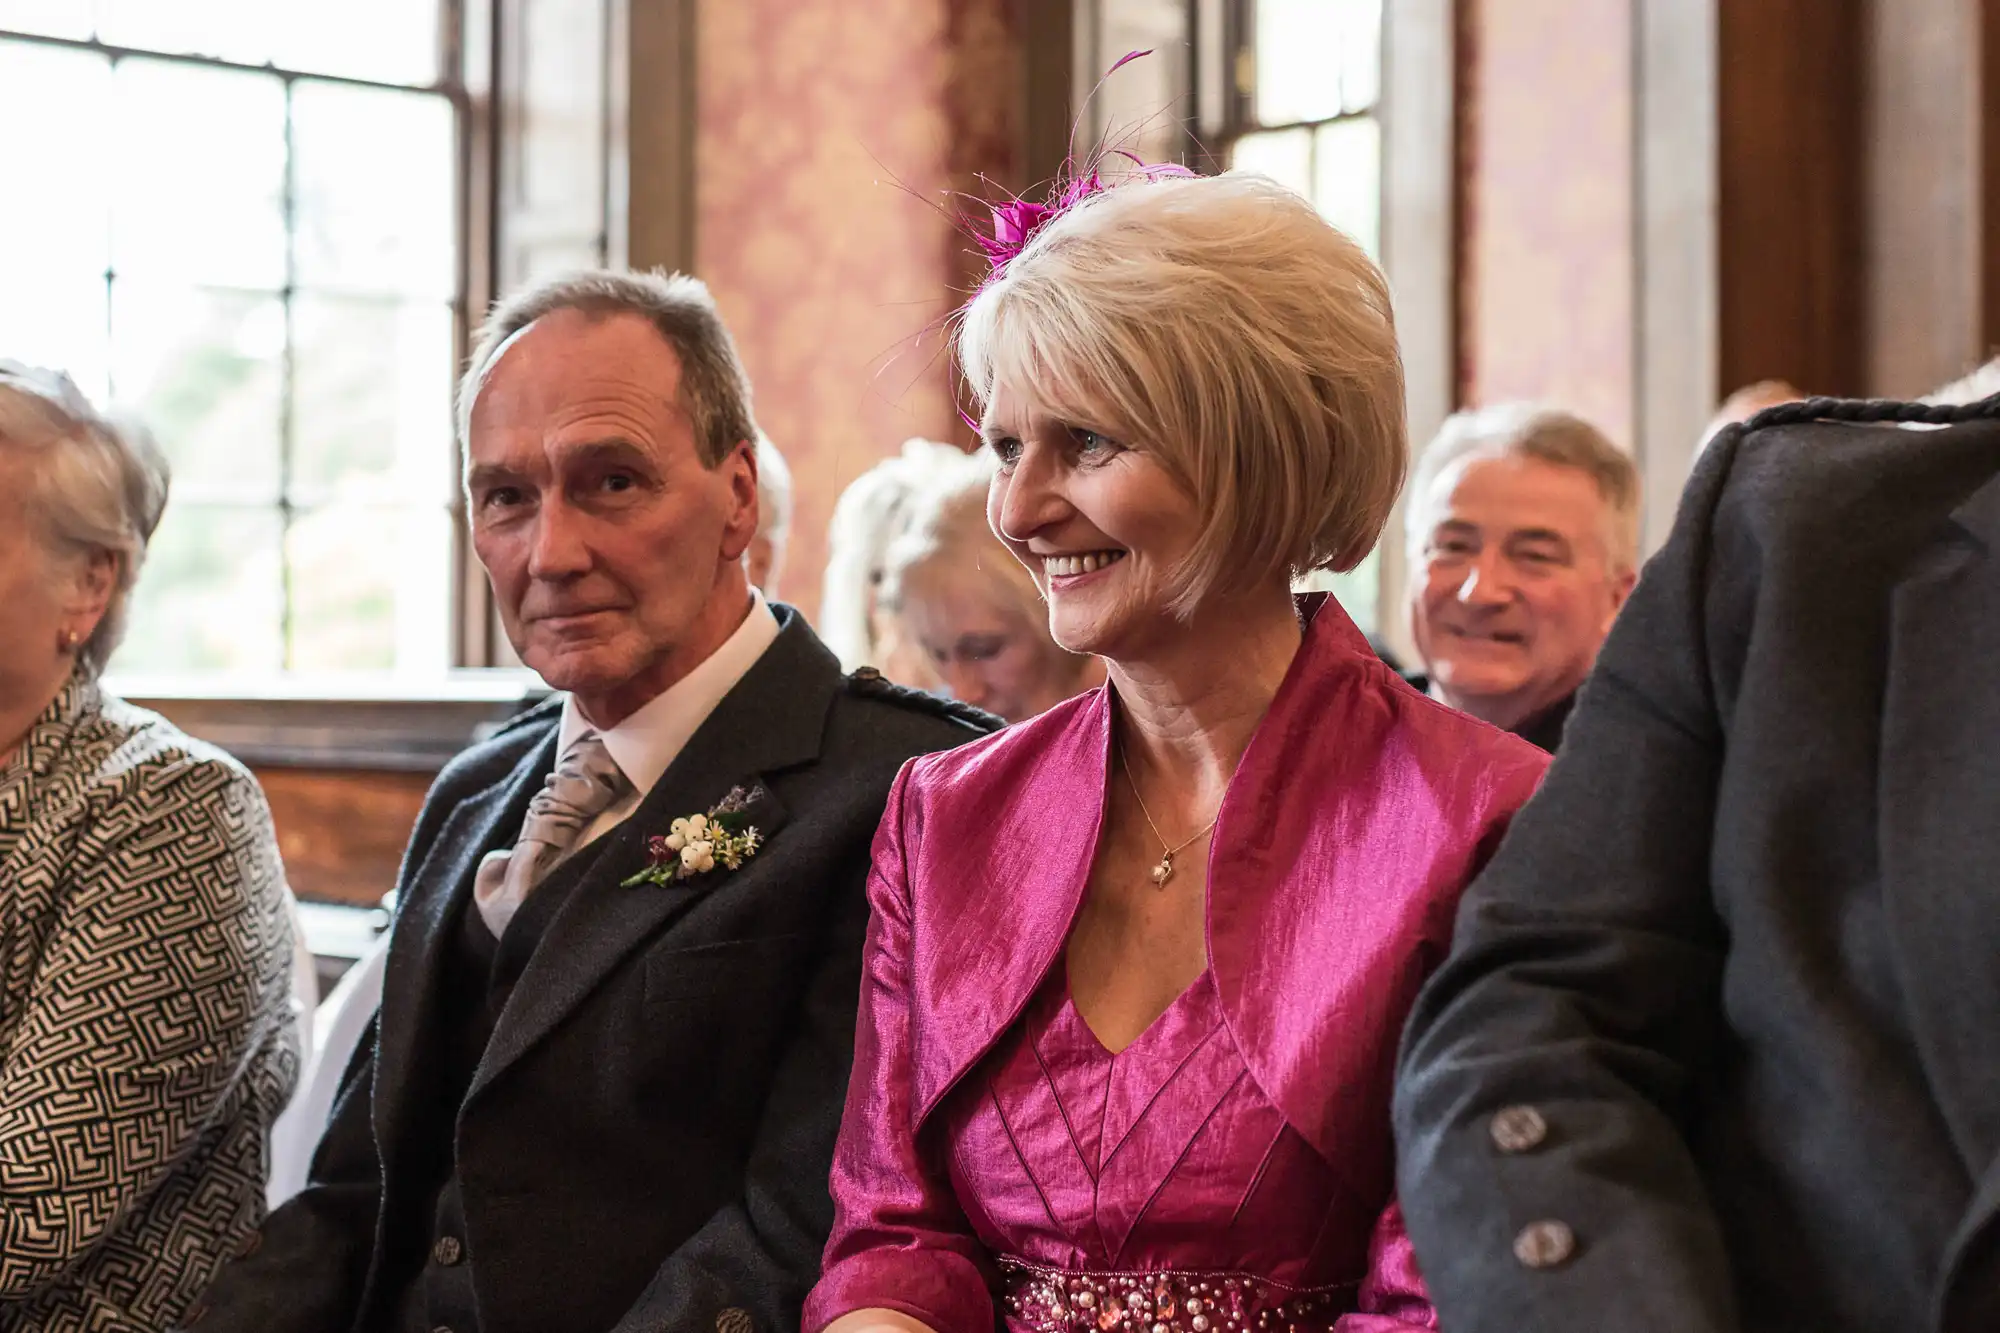 Woman in pink hat and man in suit attending an indoor event, smiling and looking to the side, with other guests in background.